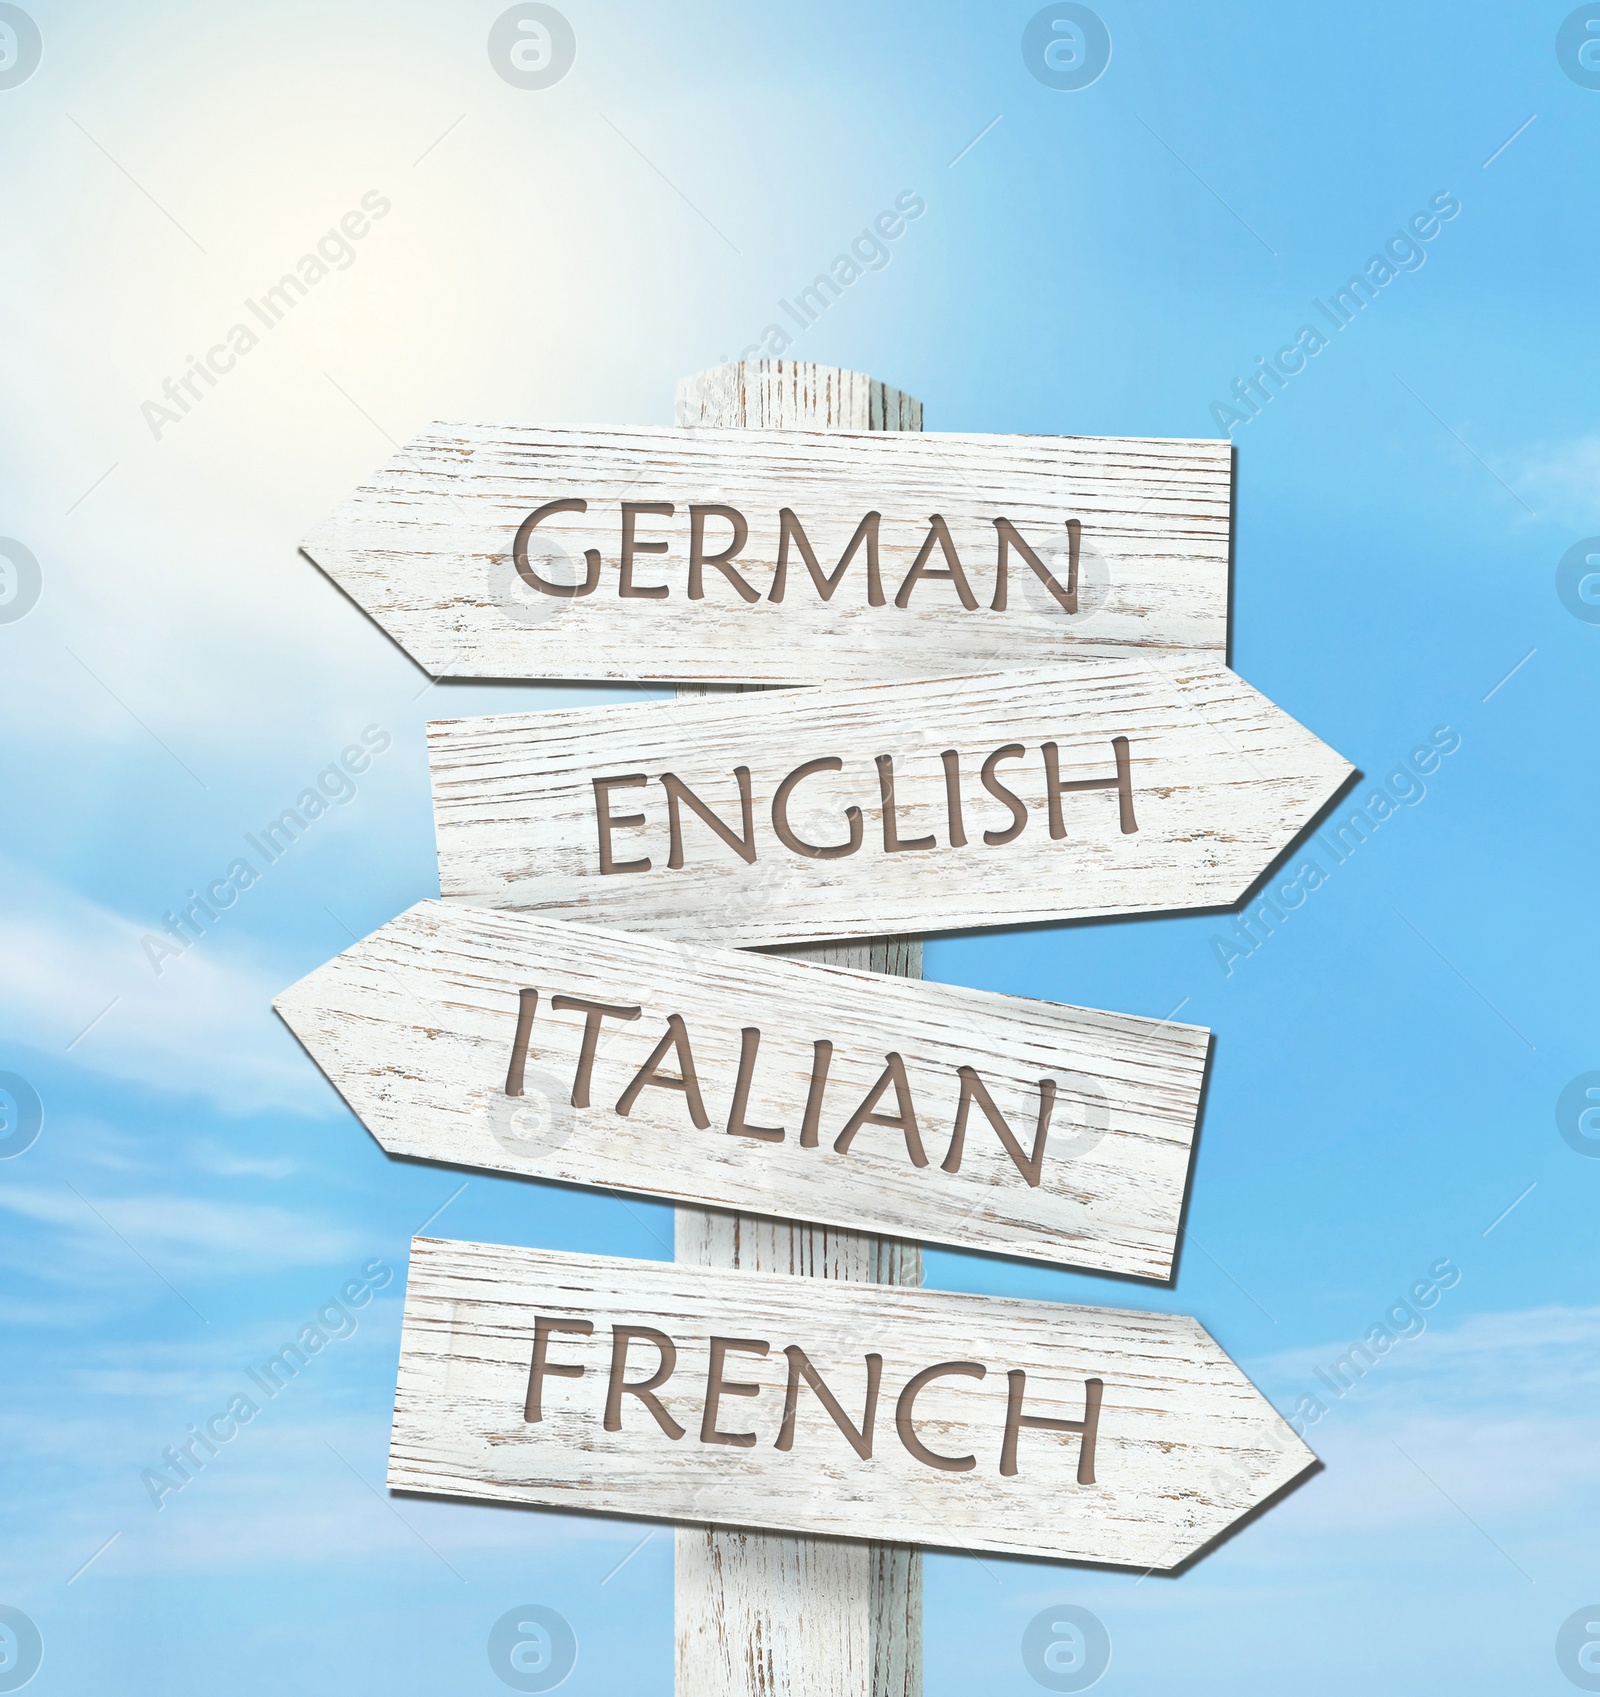 Image of Wooden signpost with names of different languages against blue sky